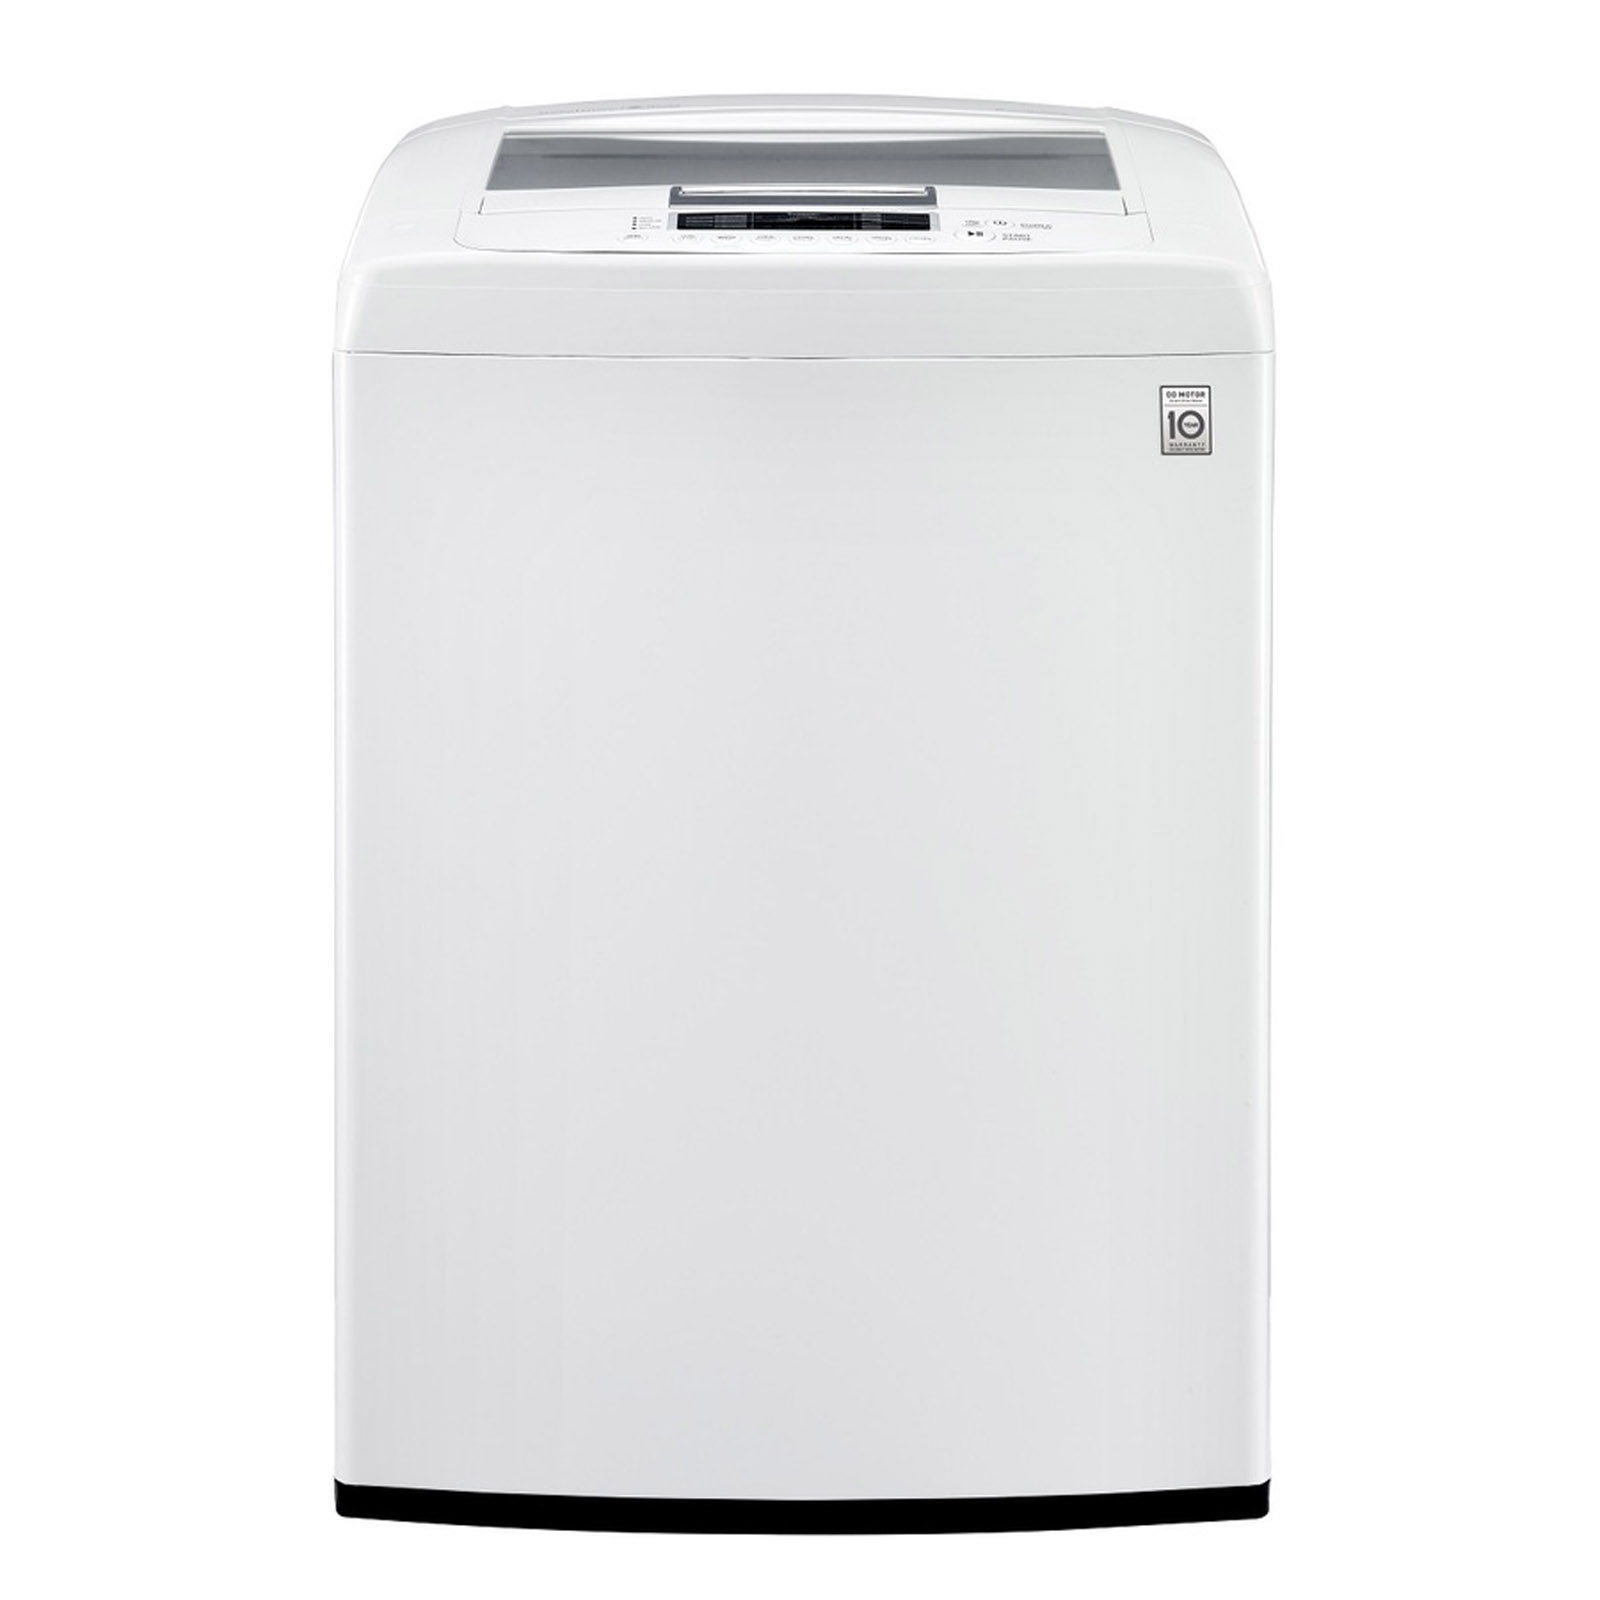 LG WT1101CW 4.1 cu. ft. Top Load Washer - Sears